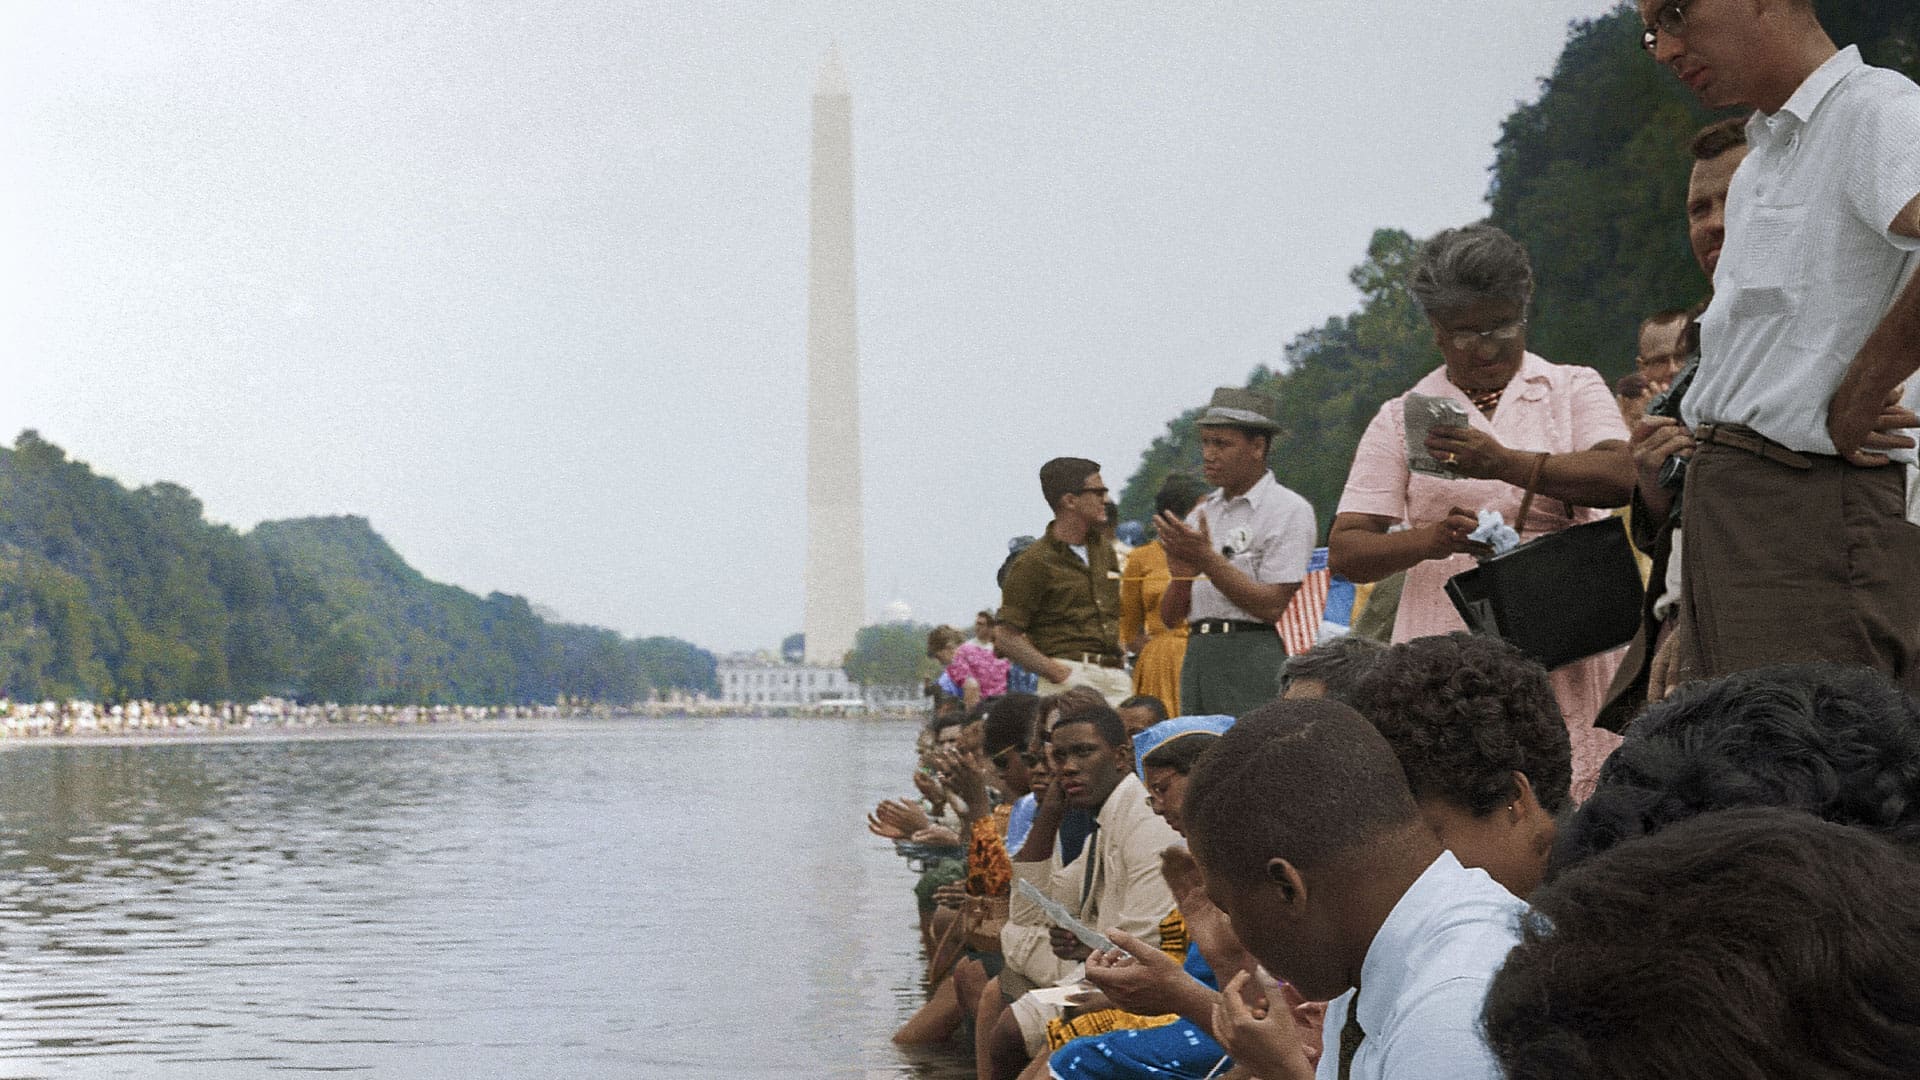 Lincoln Reflecting Pool. Featured image for The Stories at Our Table. An essay by Gregory Thompson on public memory.